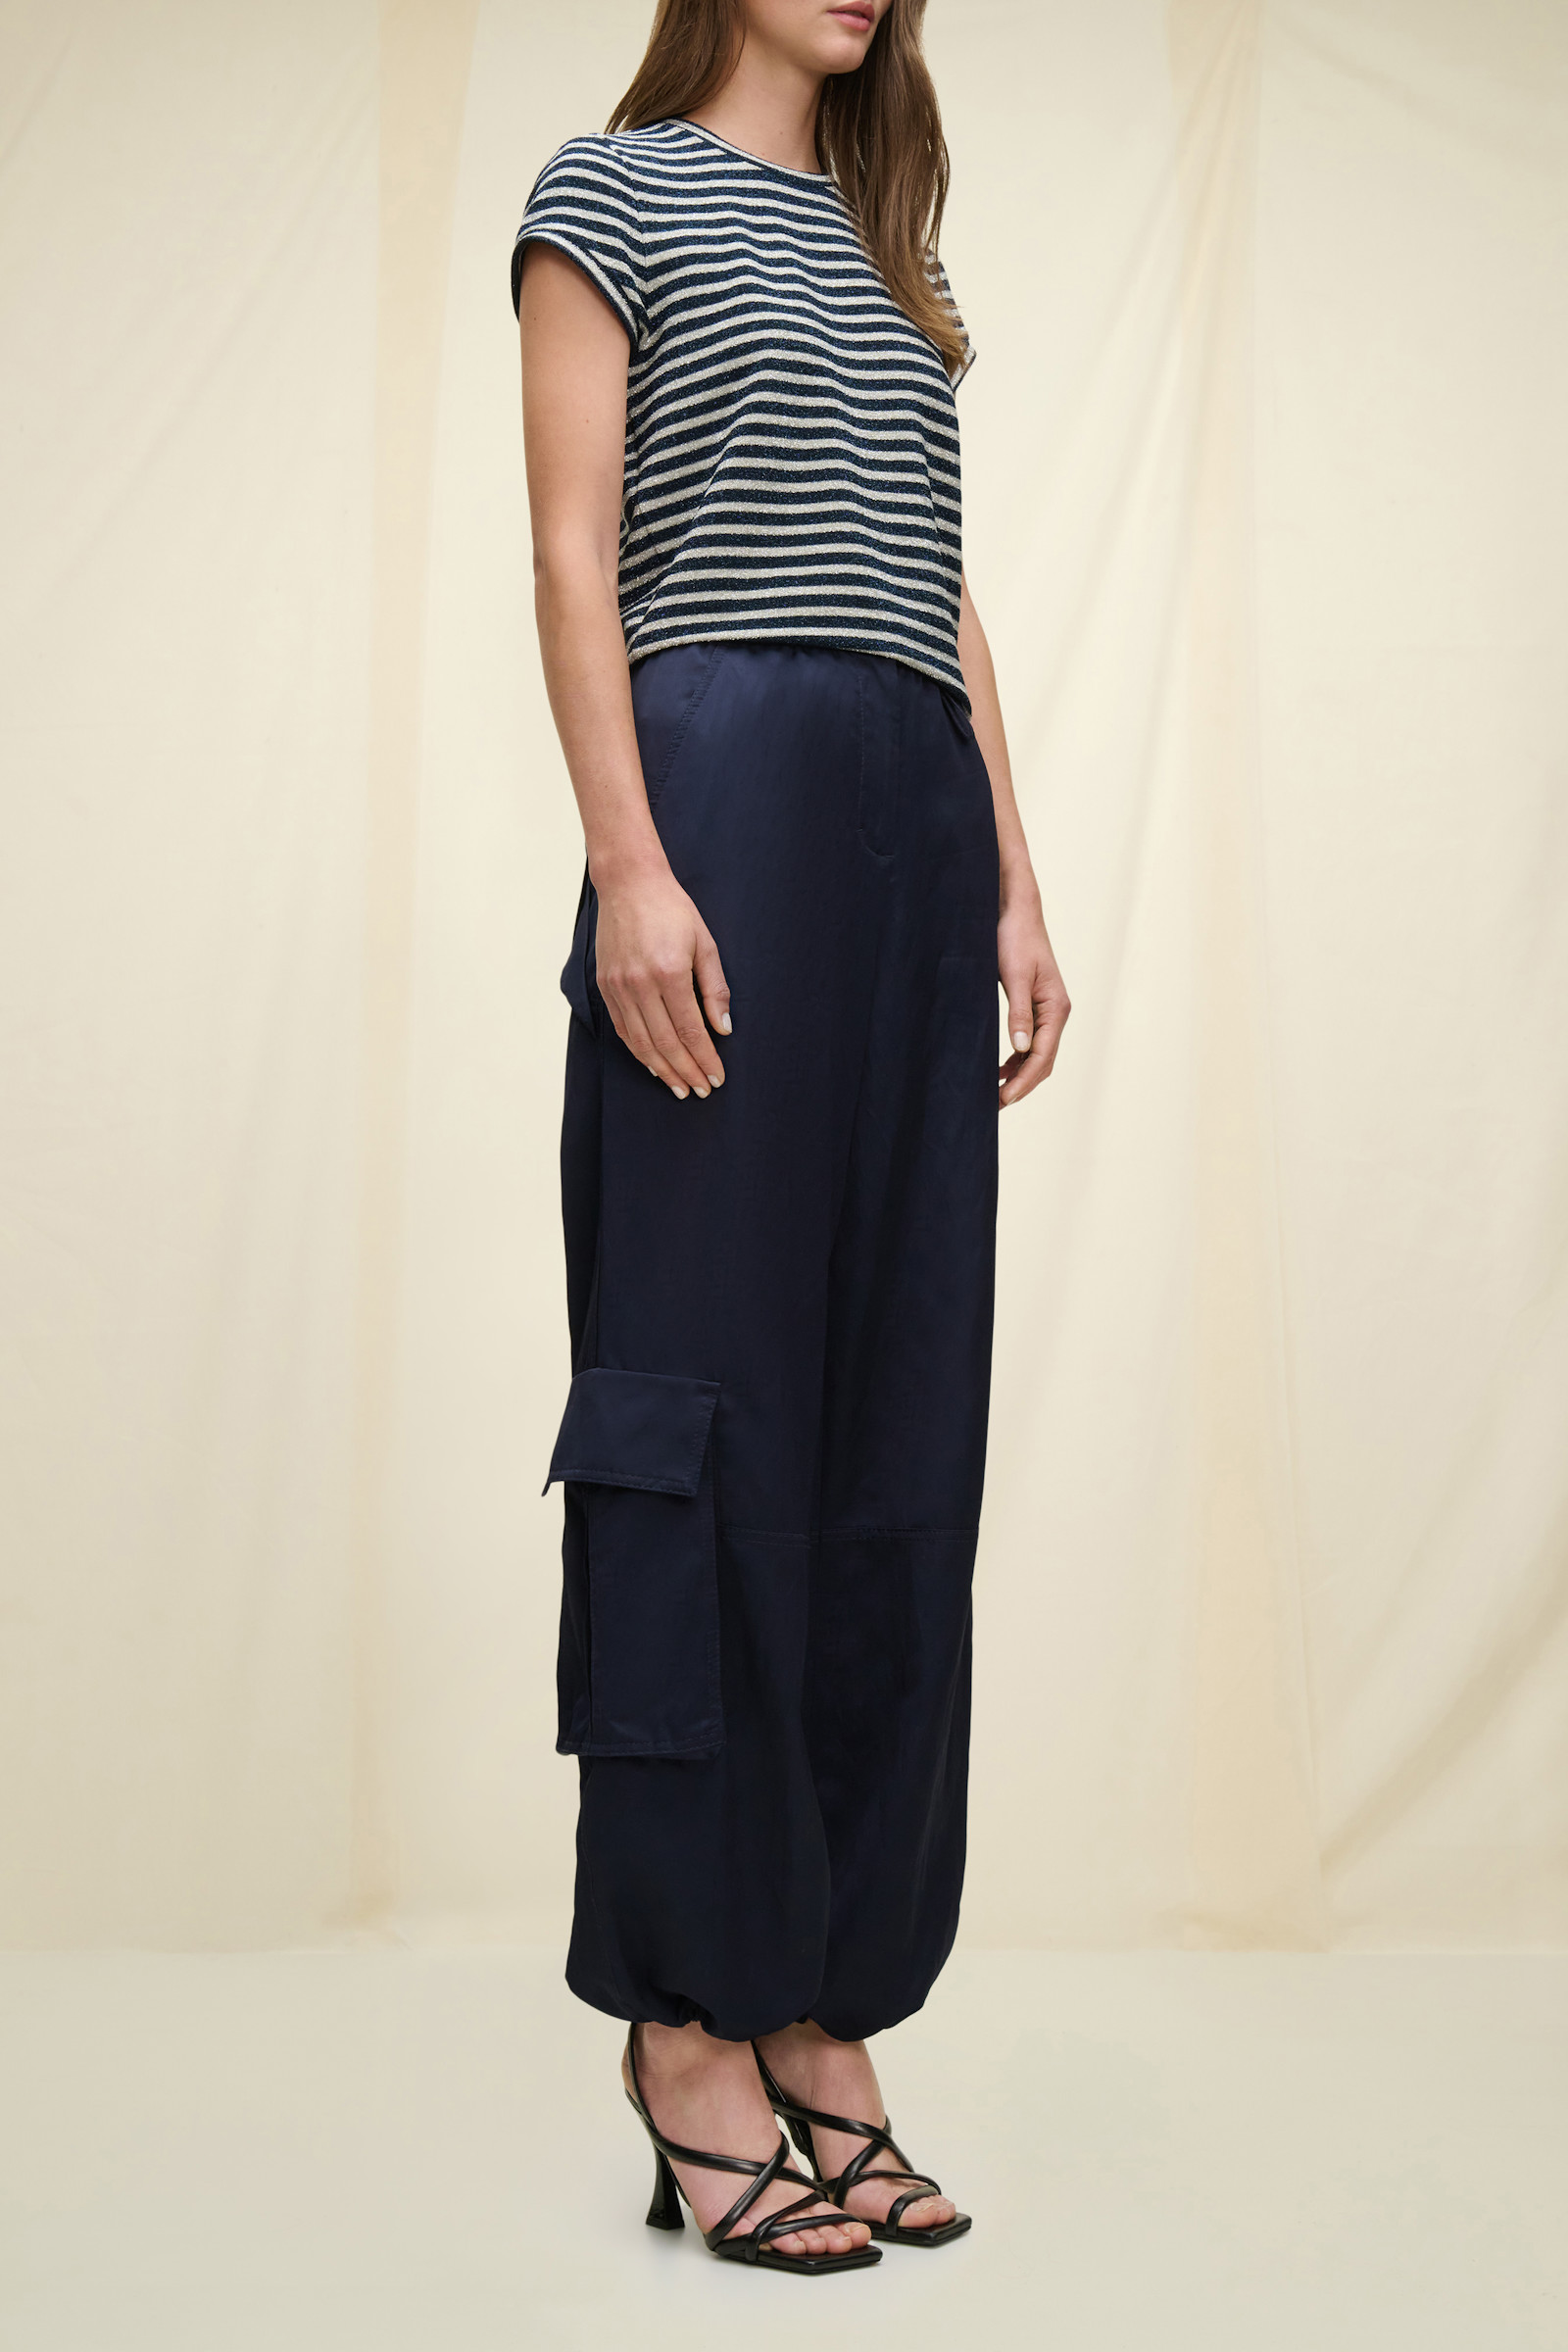 SLOUCHY COOLNESS pants